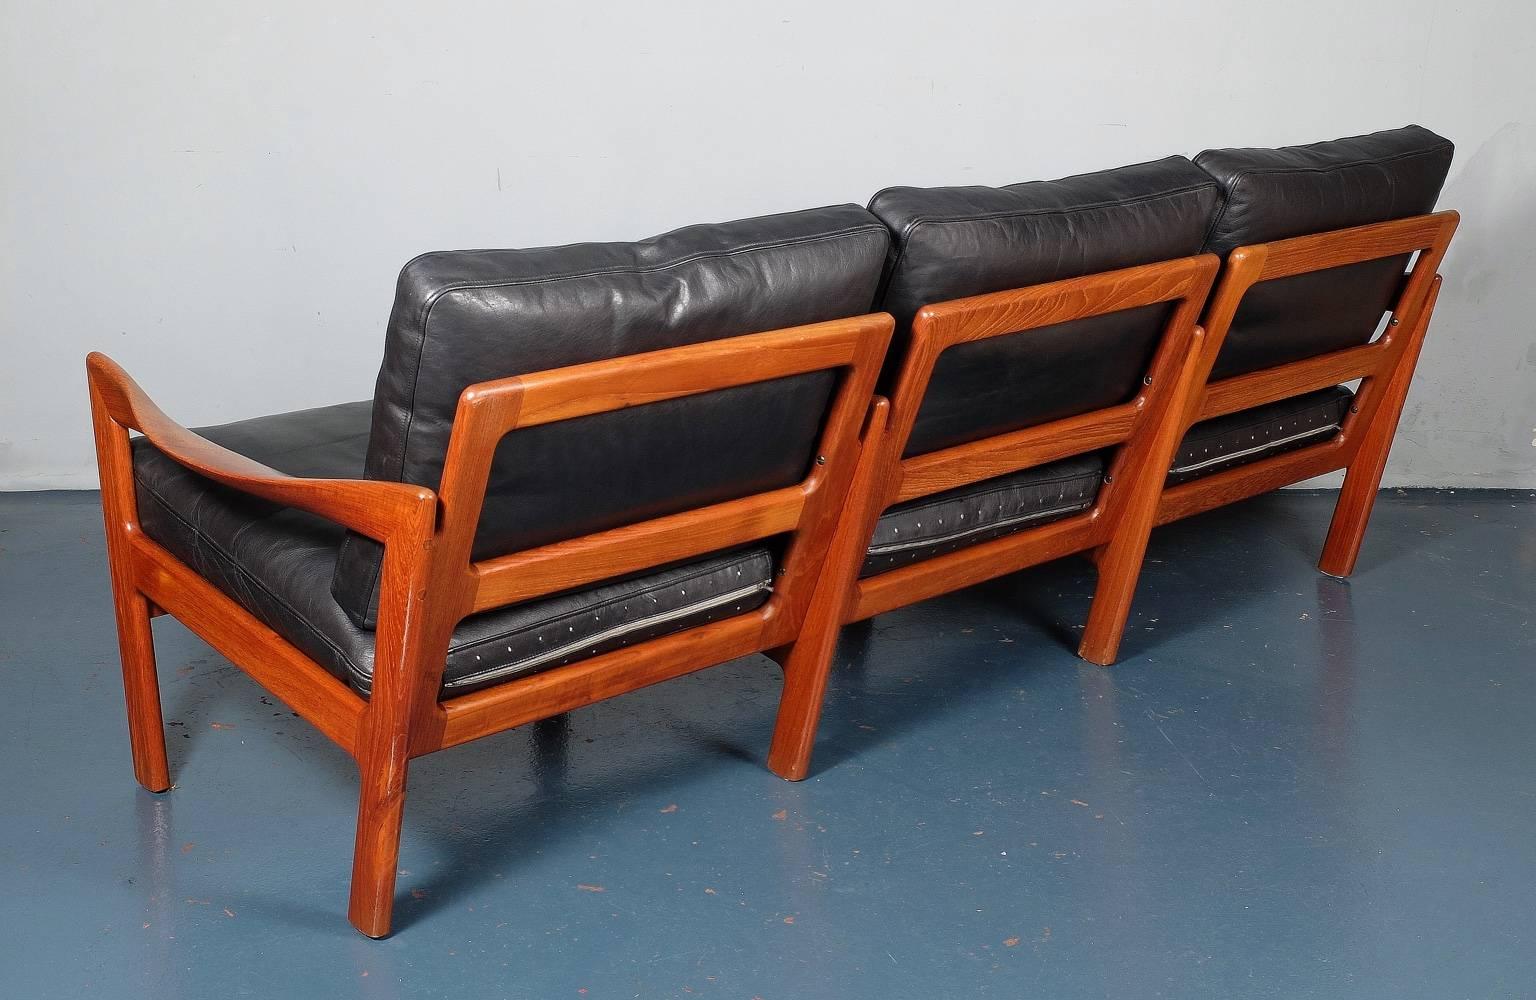 A three-seat teak sofa designed by Illum Wikkelsø and produced by Eilersen, Denmark, circa 1960. The original leather is in very good condition without significant wear, fading or marking. The black leather cushion interiors have been replaced with